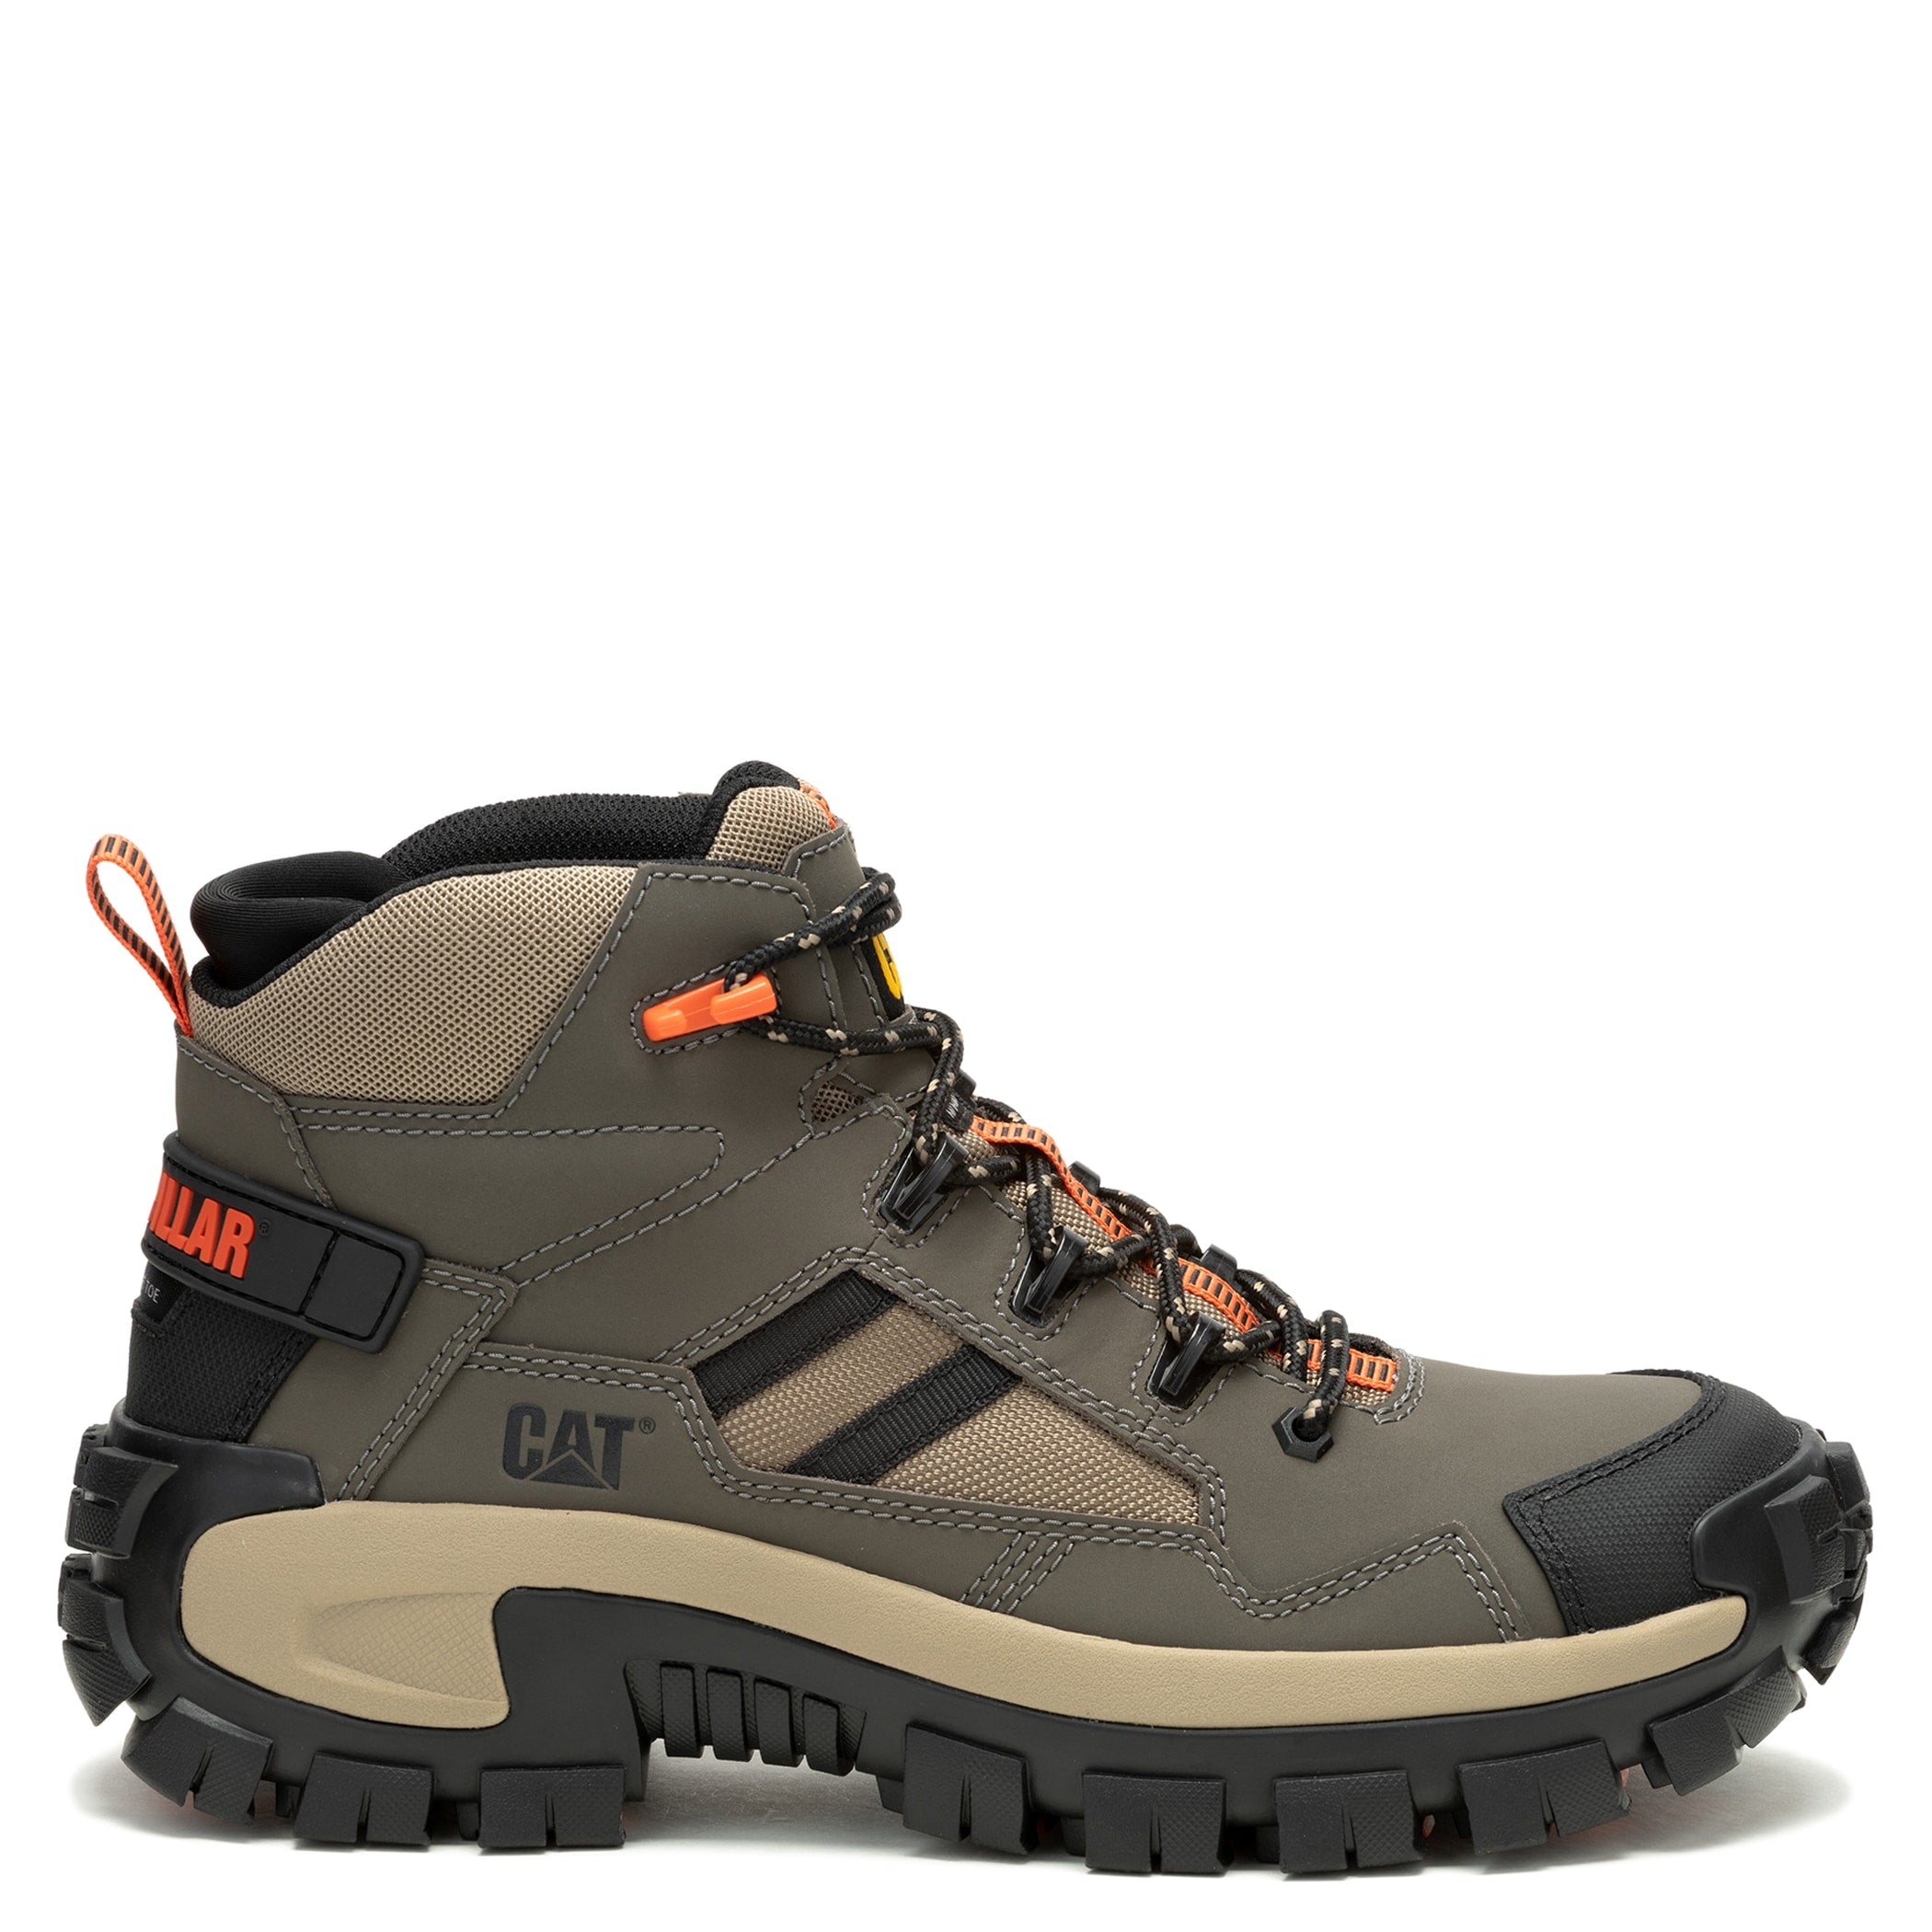 TENIS INVADER MID VENT CT INDUSTRIAL COLOR TAUPE PARA HOMBRE